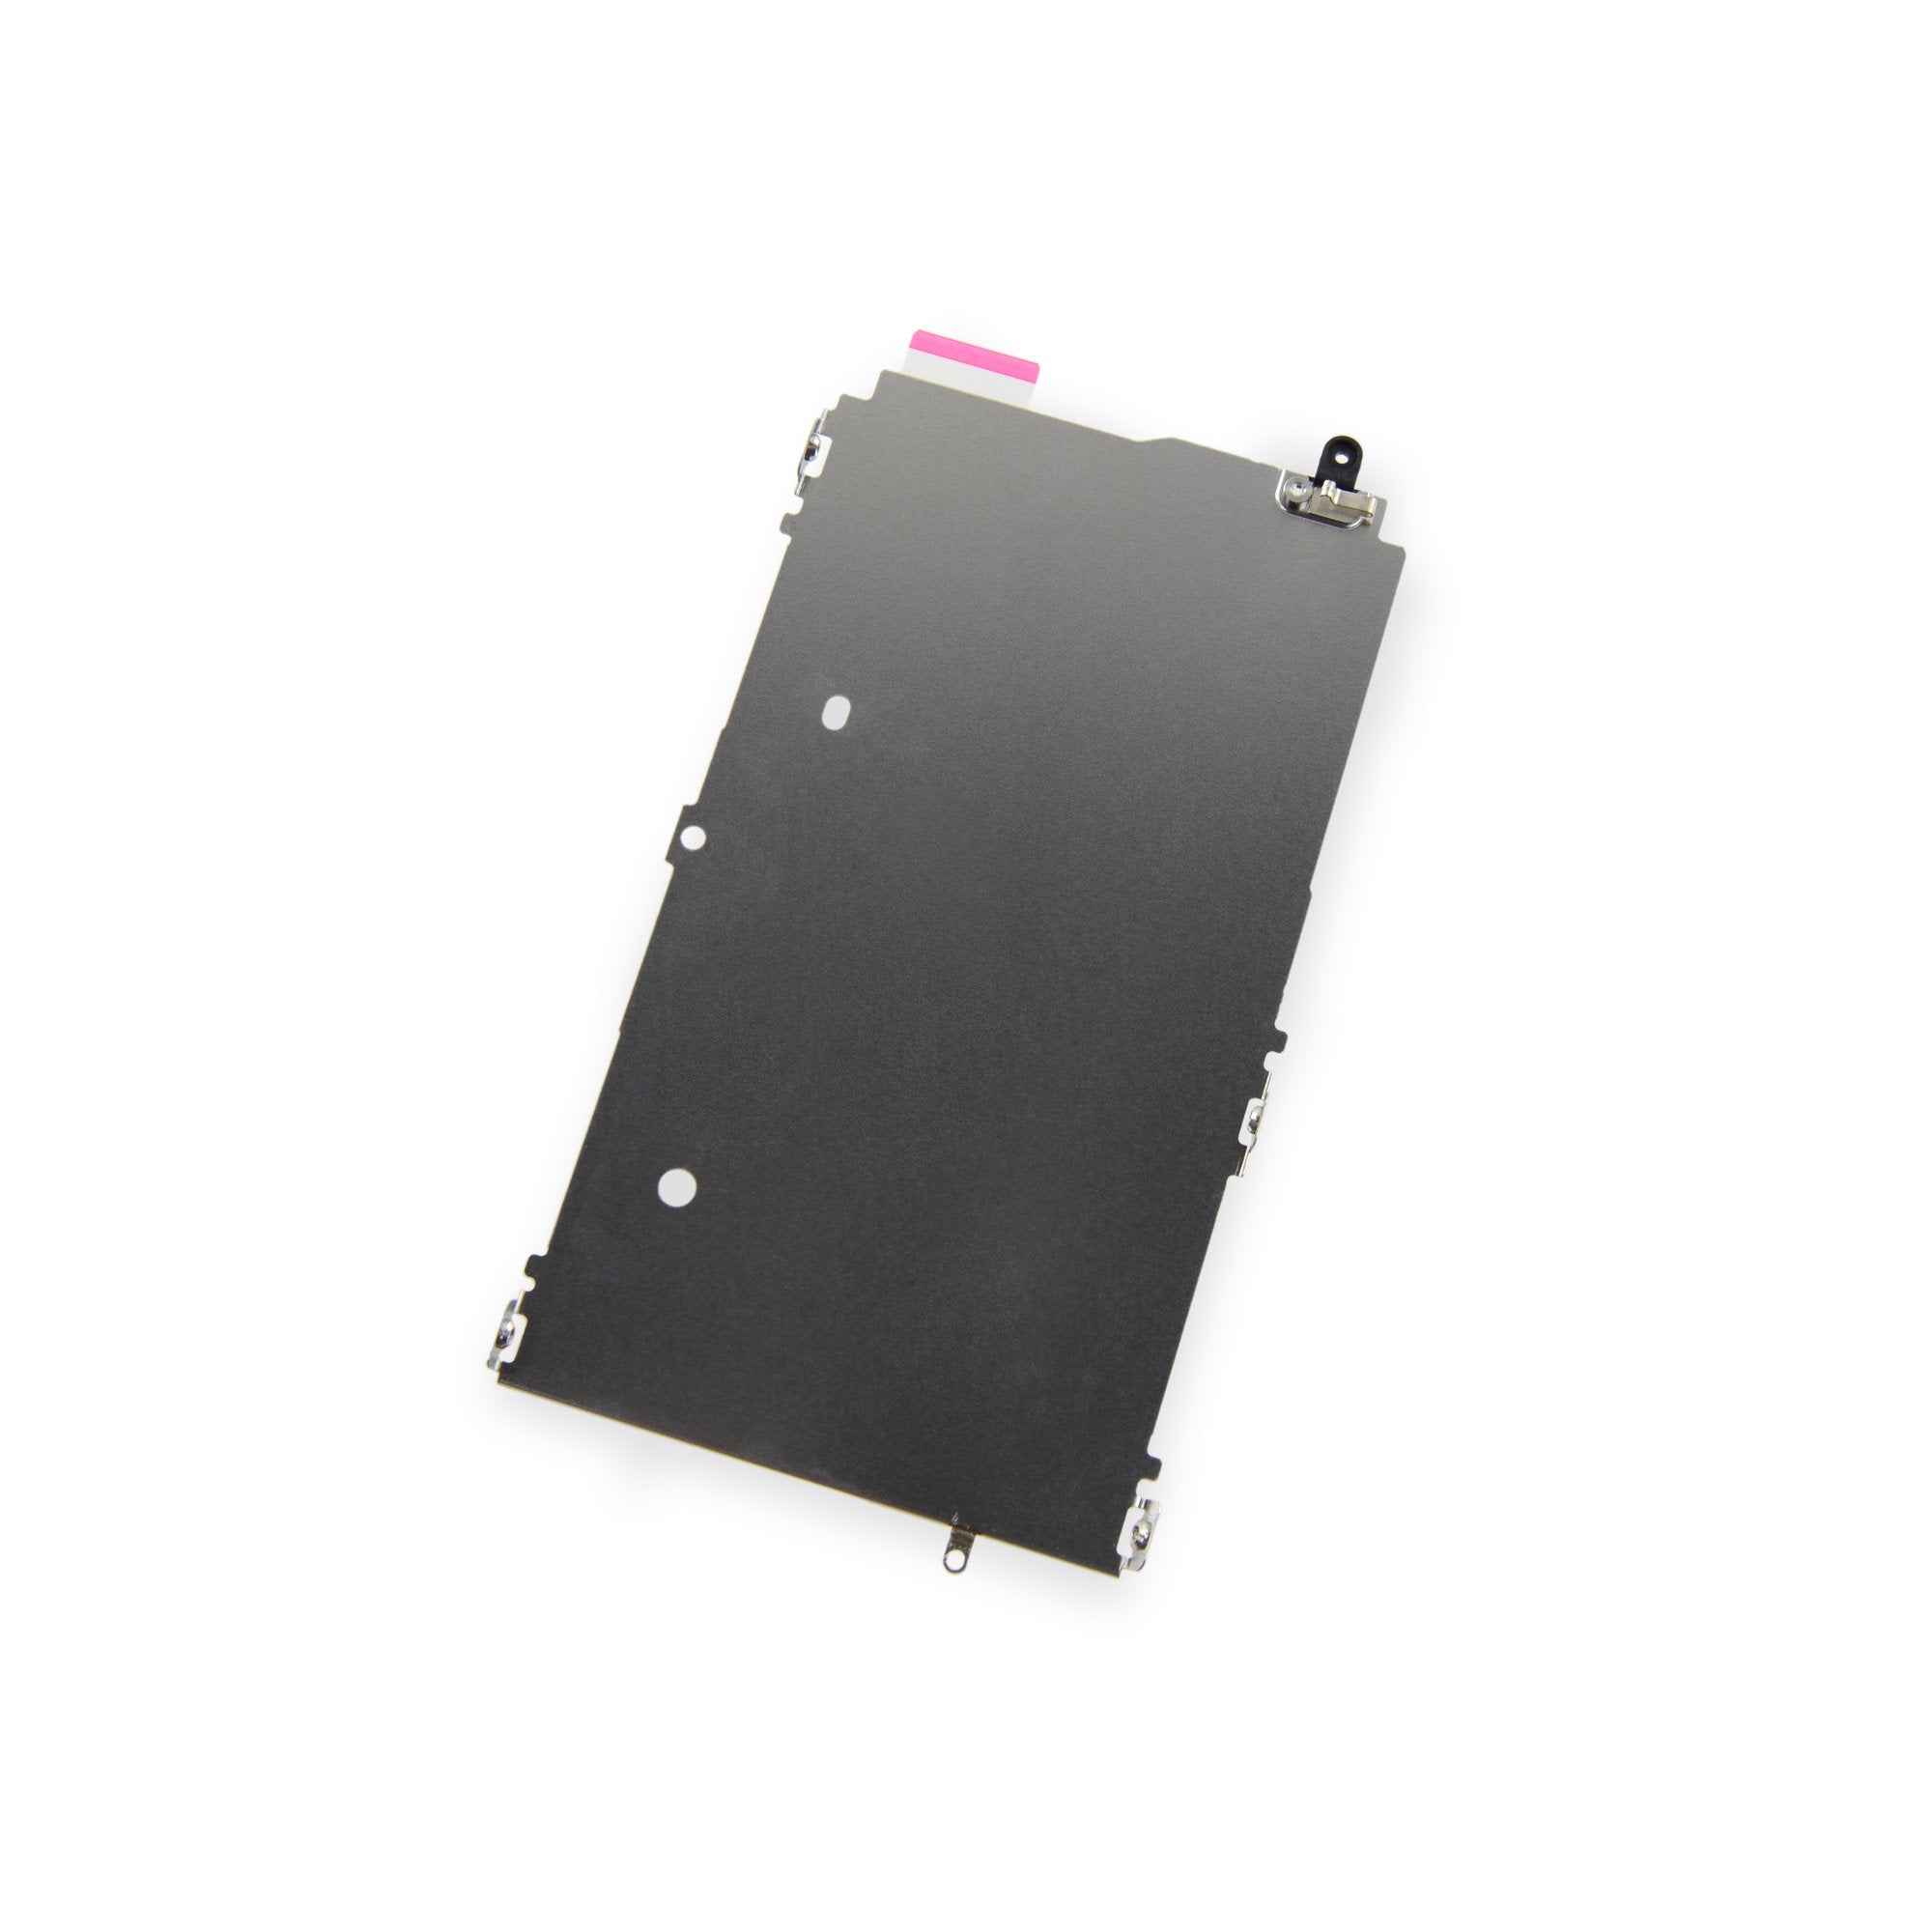 iPhone 5s/SE (1st Gen) LCD Shield Plate New